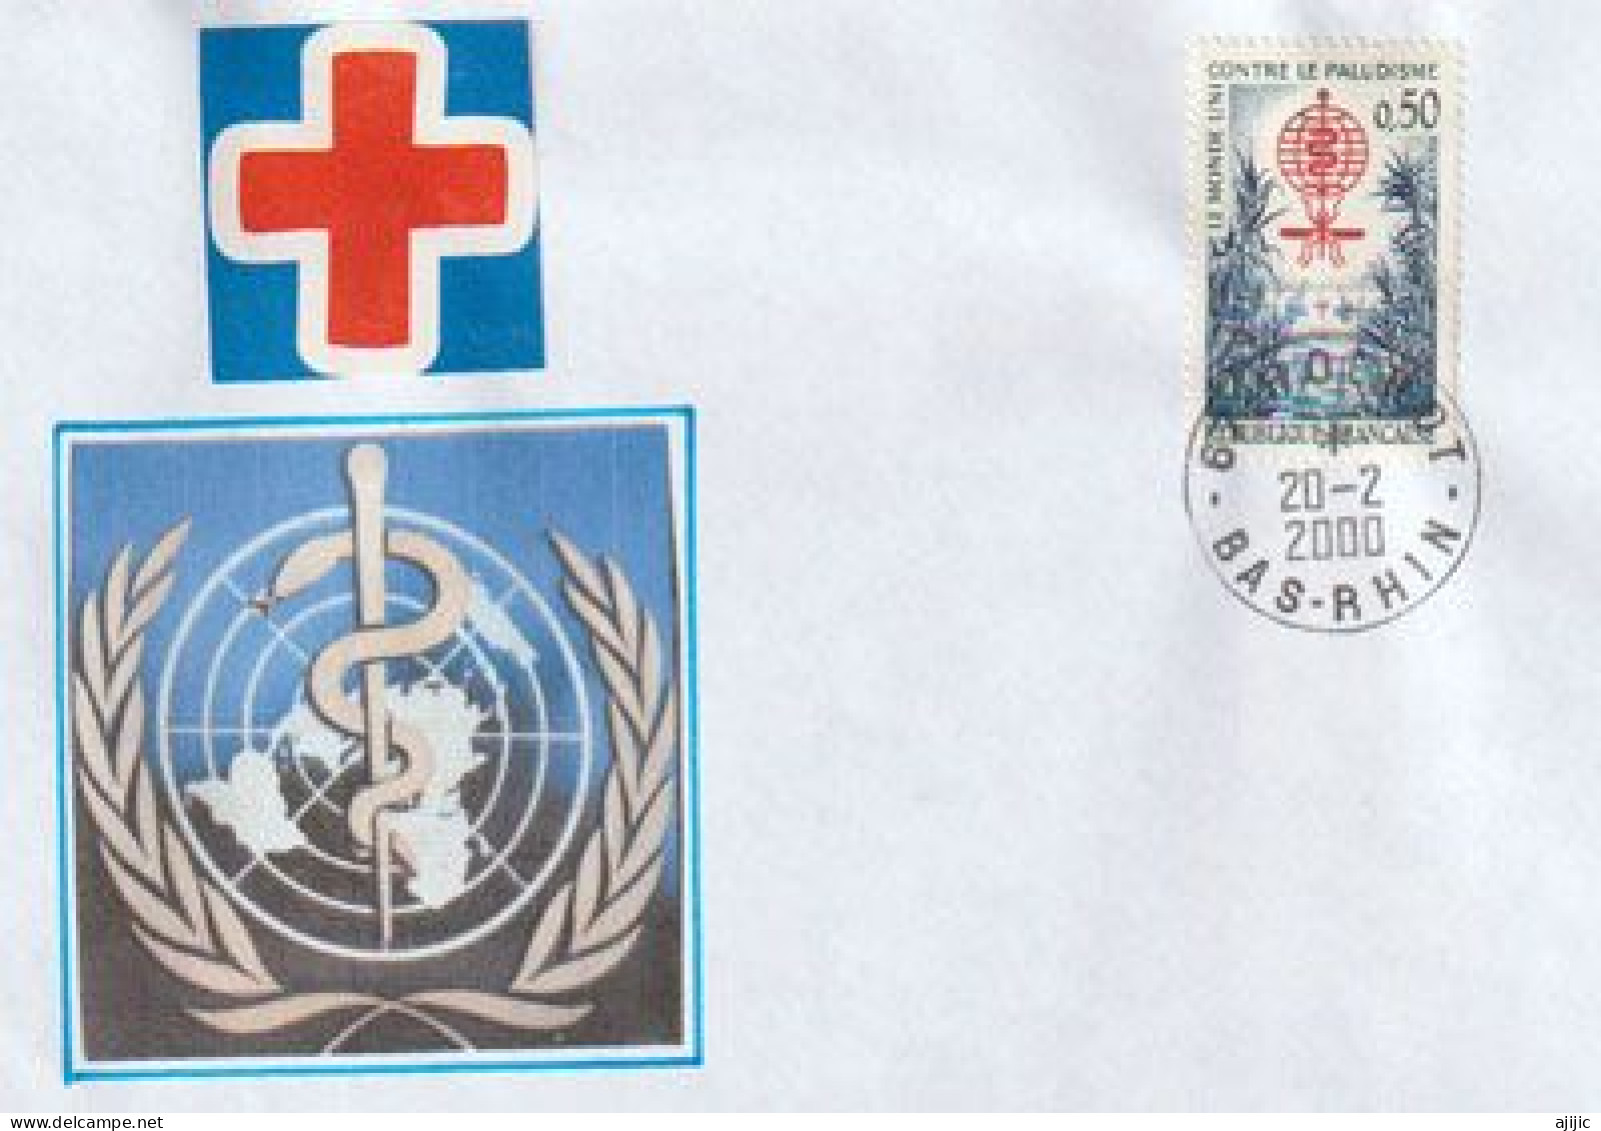 World United Against MALARIA. PALUDISME. Letter From France - First Aid